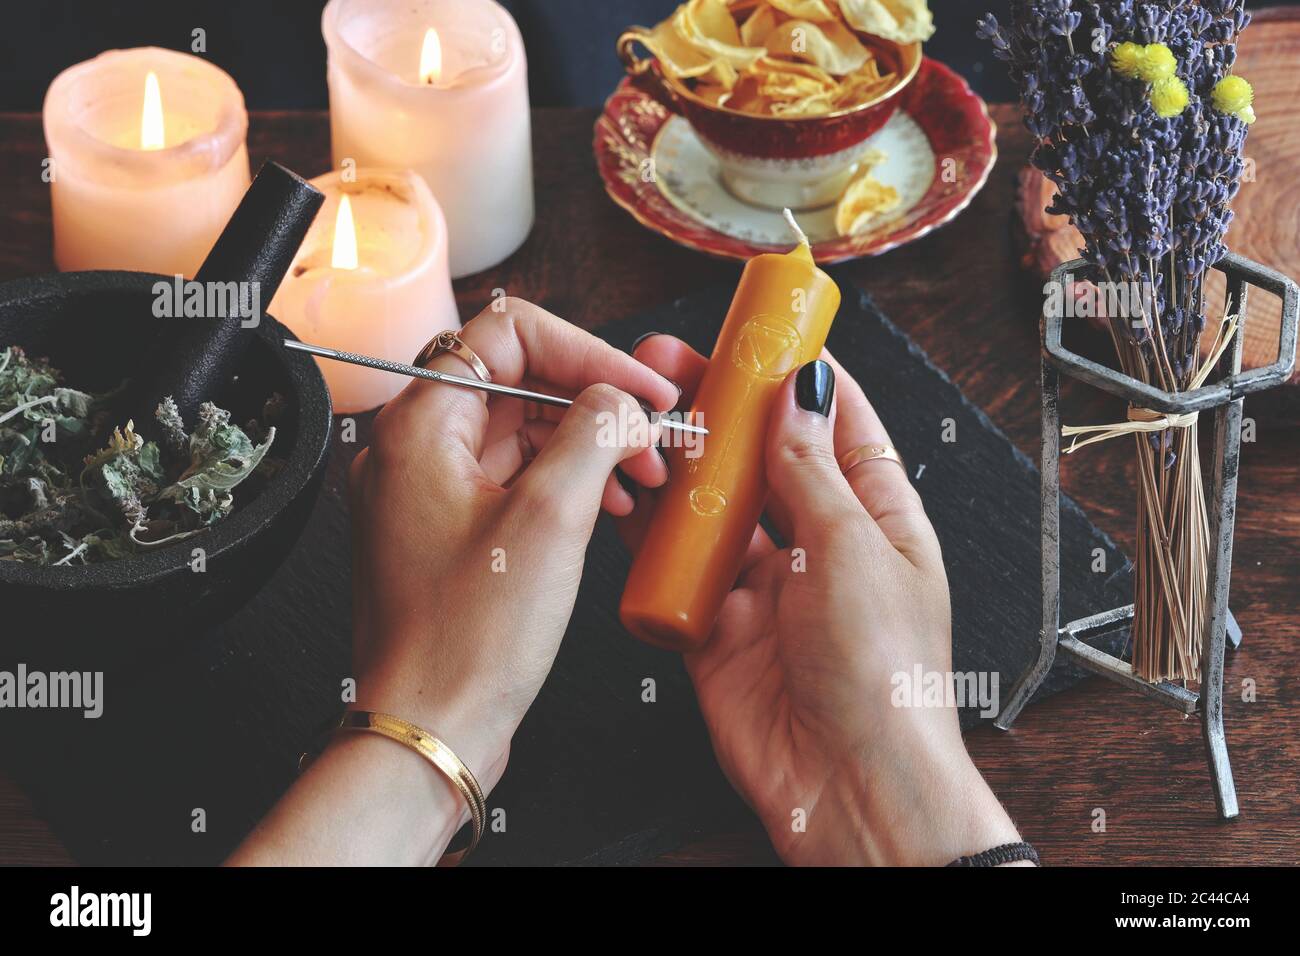 Wiccan witch carving symbols and sigils on yellow gold color candlestick at her altar. Holding candle in hands. Witchy elements in blurred background Stock Photo